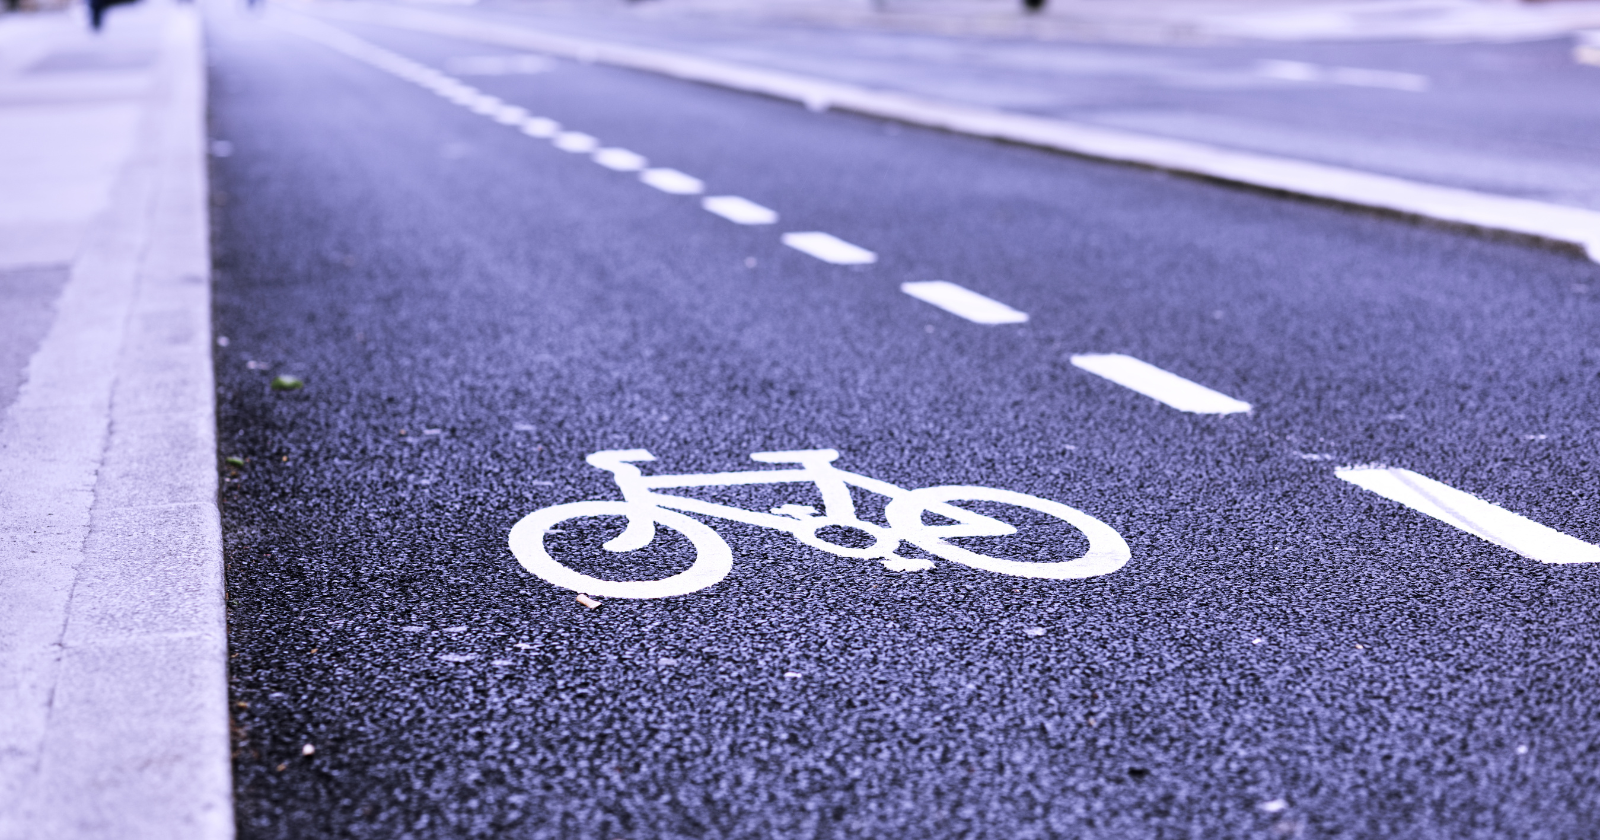 So, there you have it – our top bike safety tips for staying safe on your bike. We hope you found this post helpful and that it encourages you to get out there and start cycling! As always, we love to hear from our readers, so please leave a comment below with any questions or thoughts you may have. And be sure to share this post with your friends and family – the more people who know about these safety tips, the better!